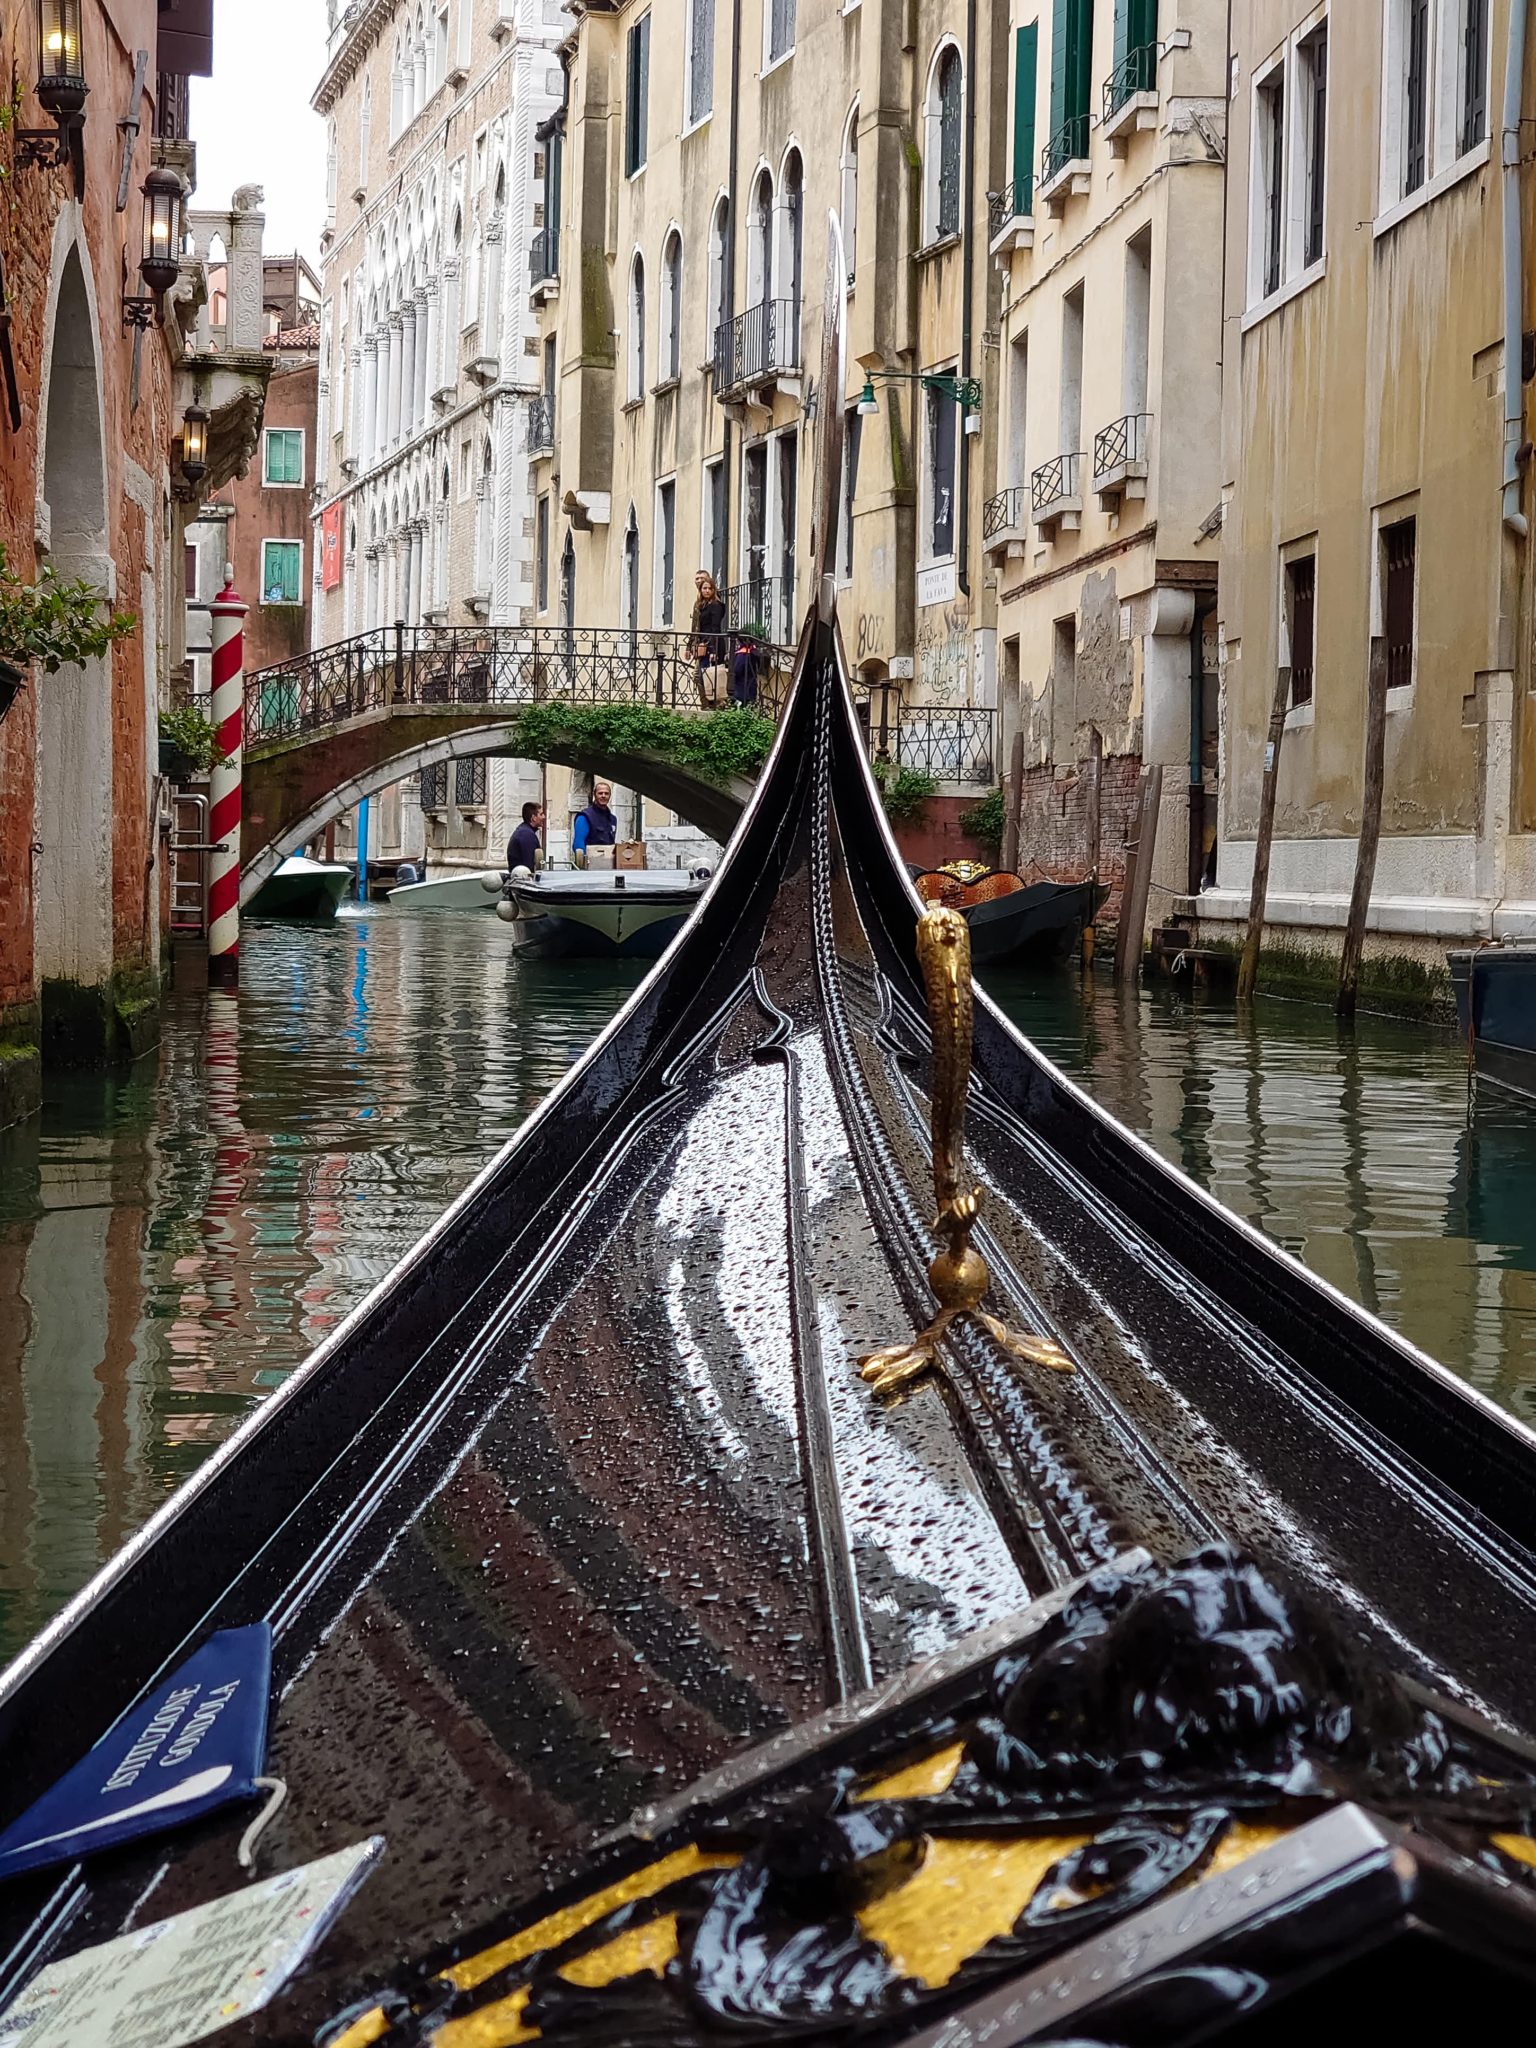 Going, going, gondola: how to take incredible travel photography in one of the world’s most-visited places